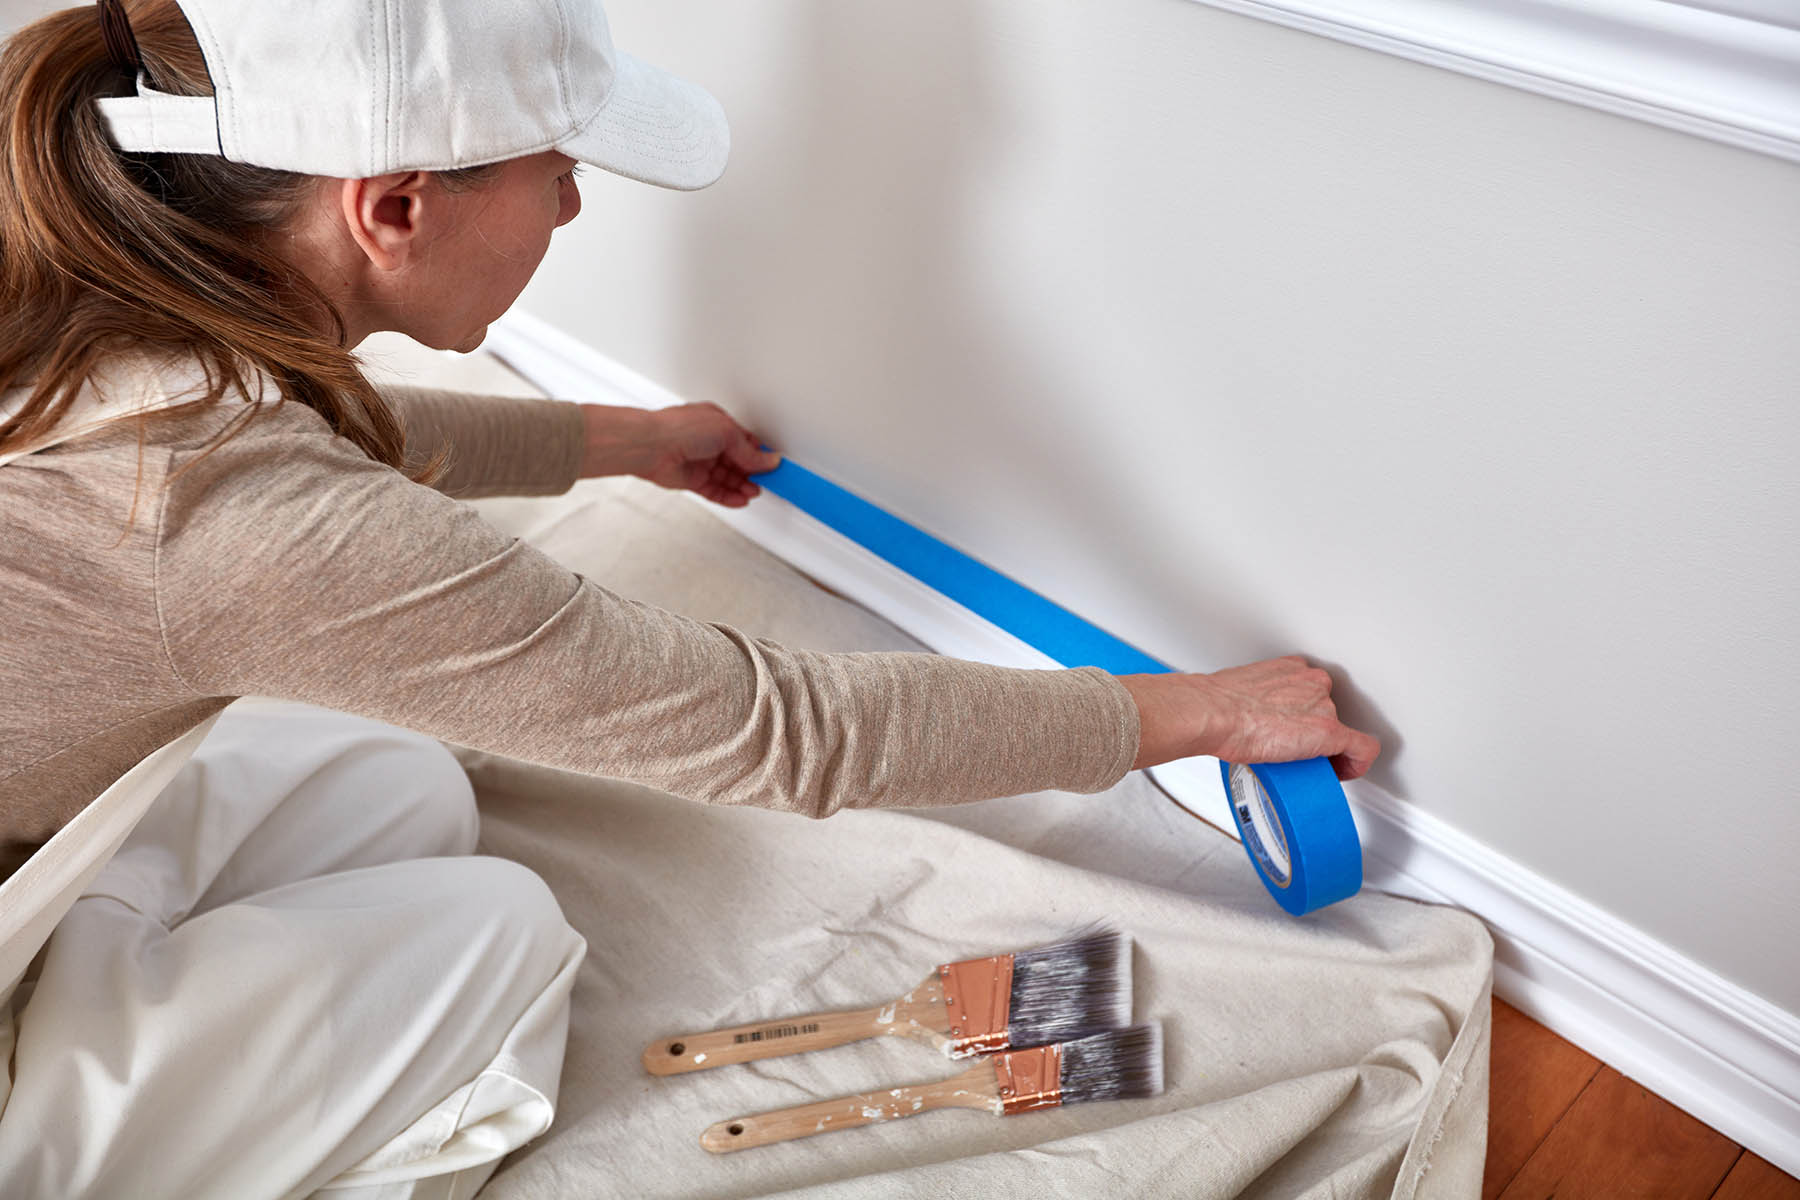 Step-by-Step Guide to Painting a Room